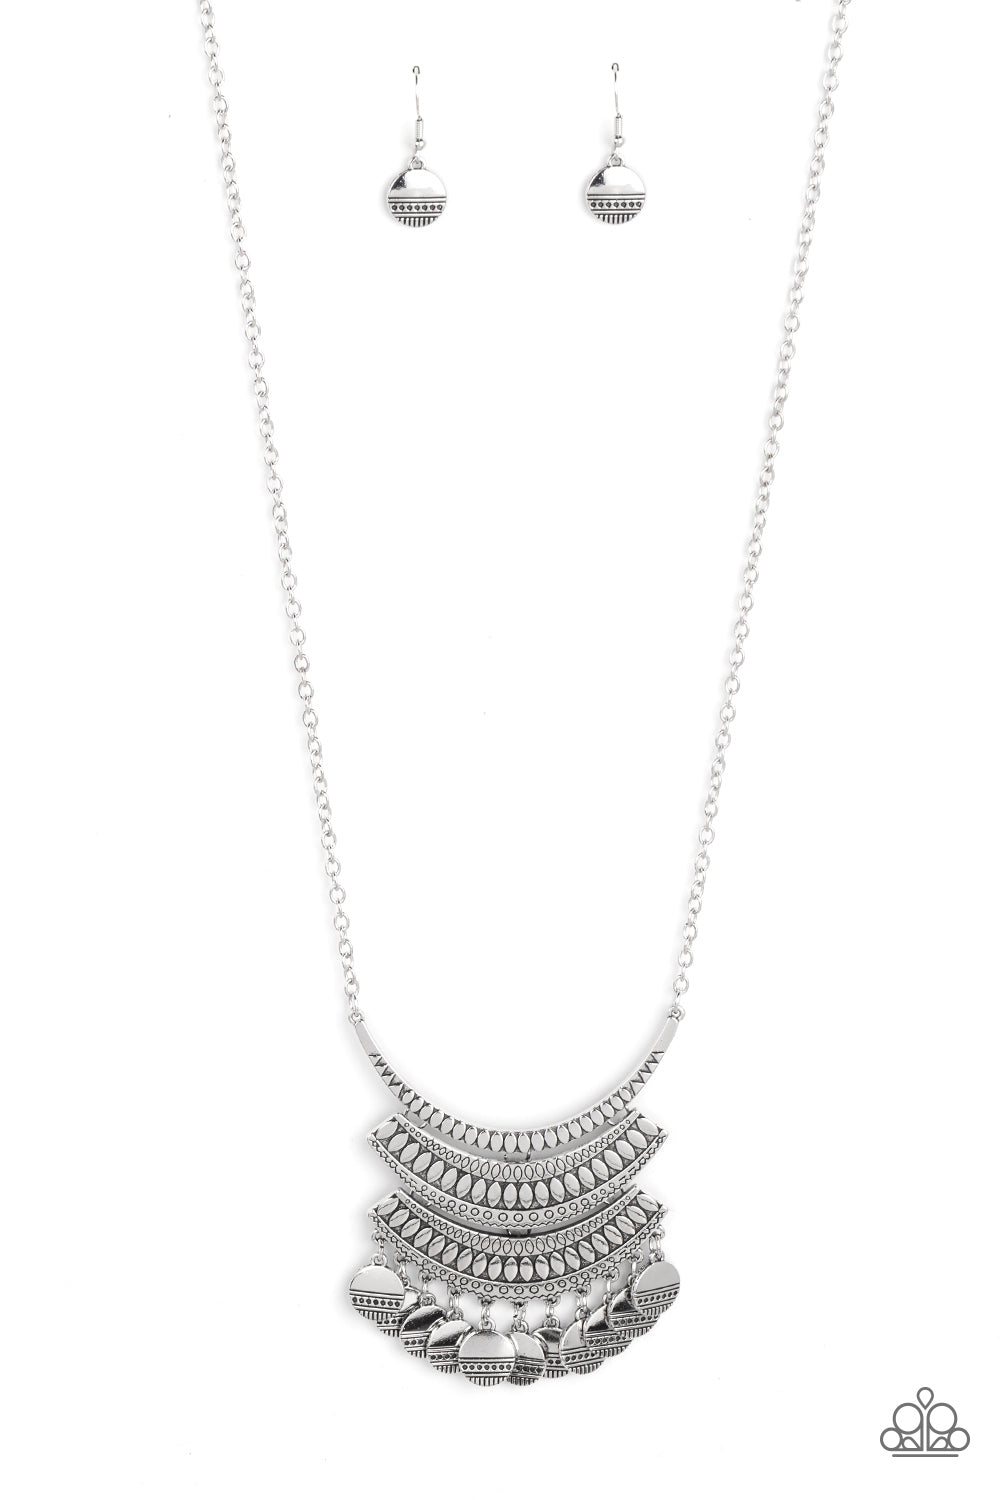 Under the EMPRESS-ion Necklace by Paparazzi Accessories